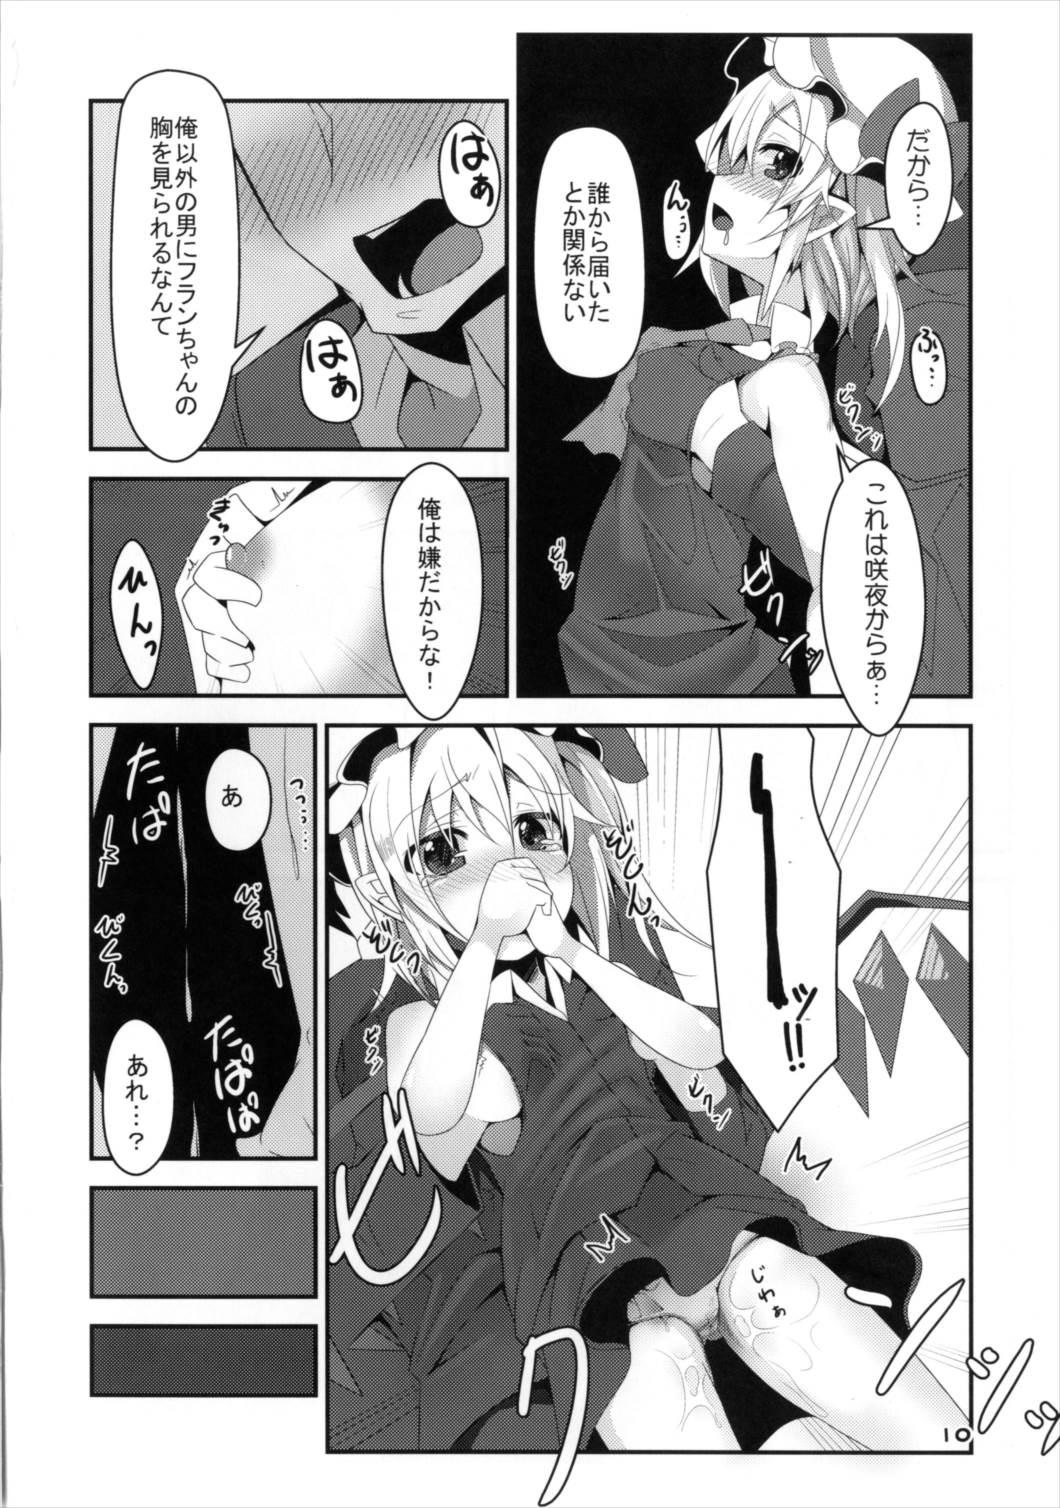 Uncensored FLAN-CHAN COOL BIZ - Touhou project Skinny - Page 9